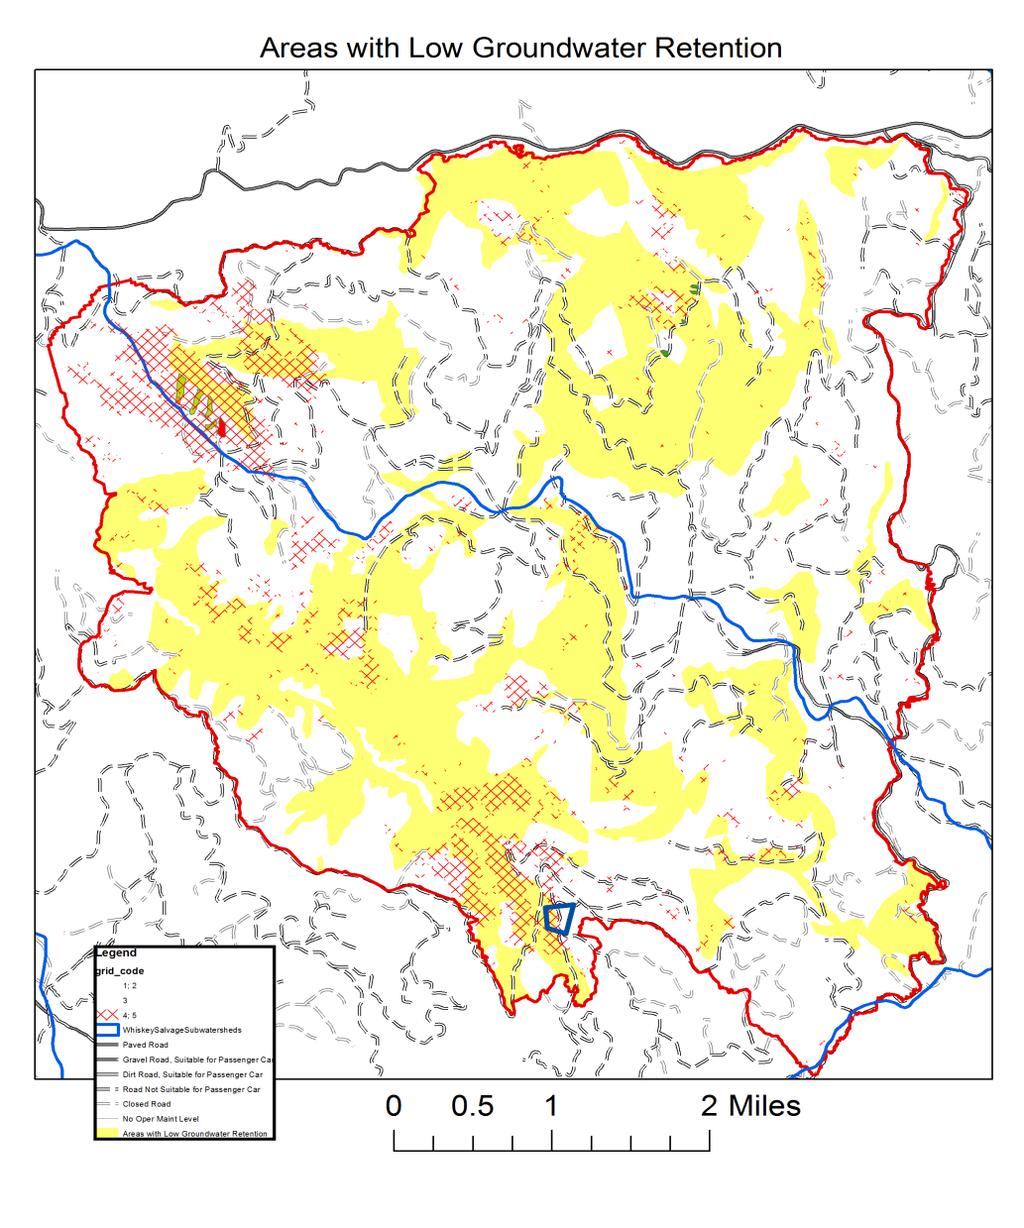 Figure 53. Areas of low storm water retention and groundwater storage capacities within the Whiskey Salvage Planning Area.